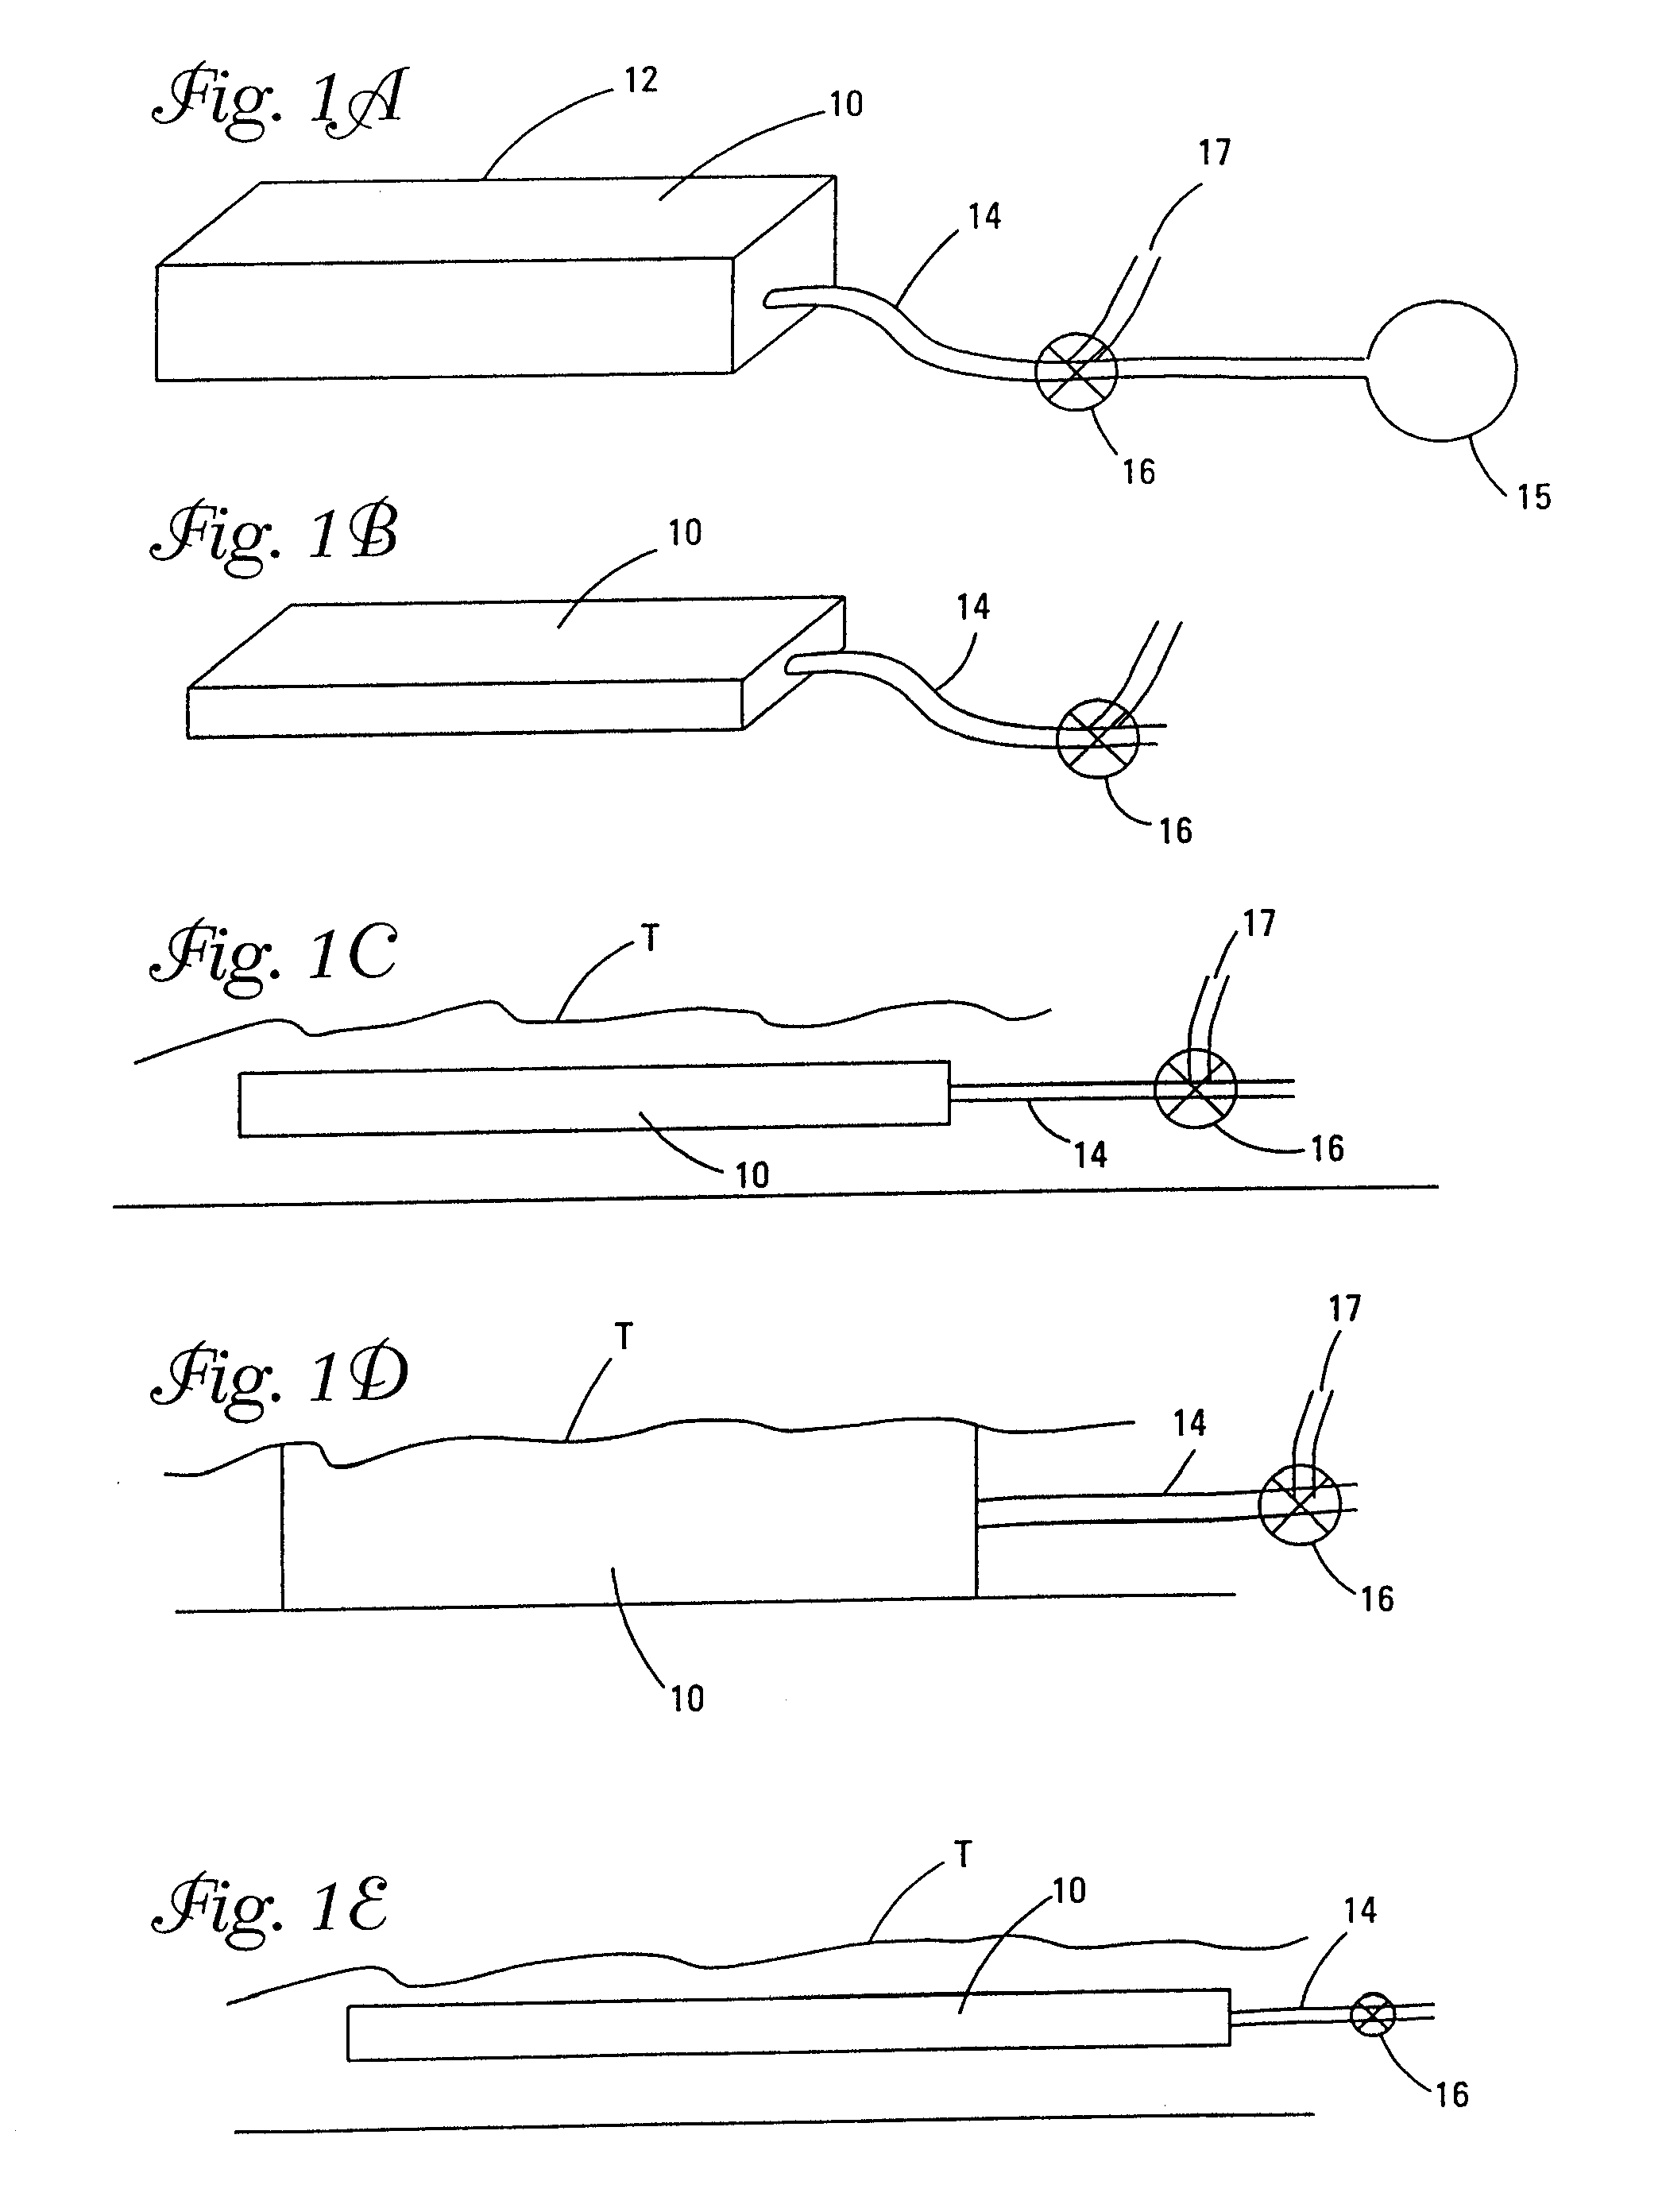 Therapeutic device and system